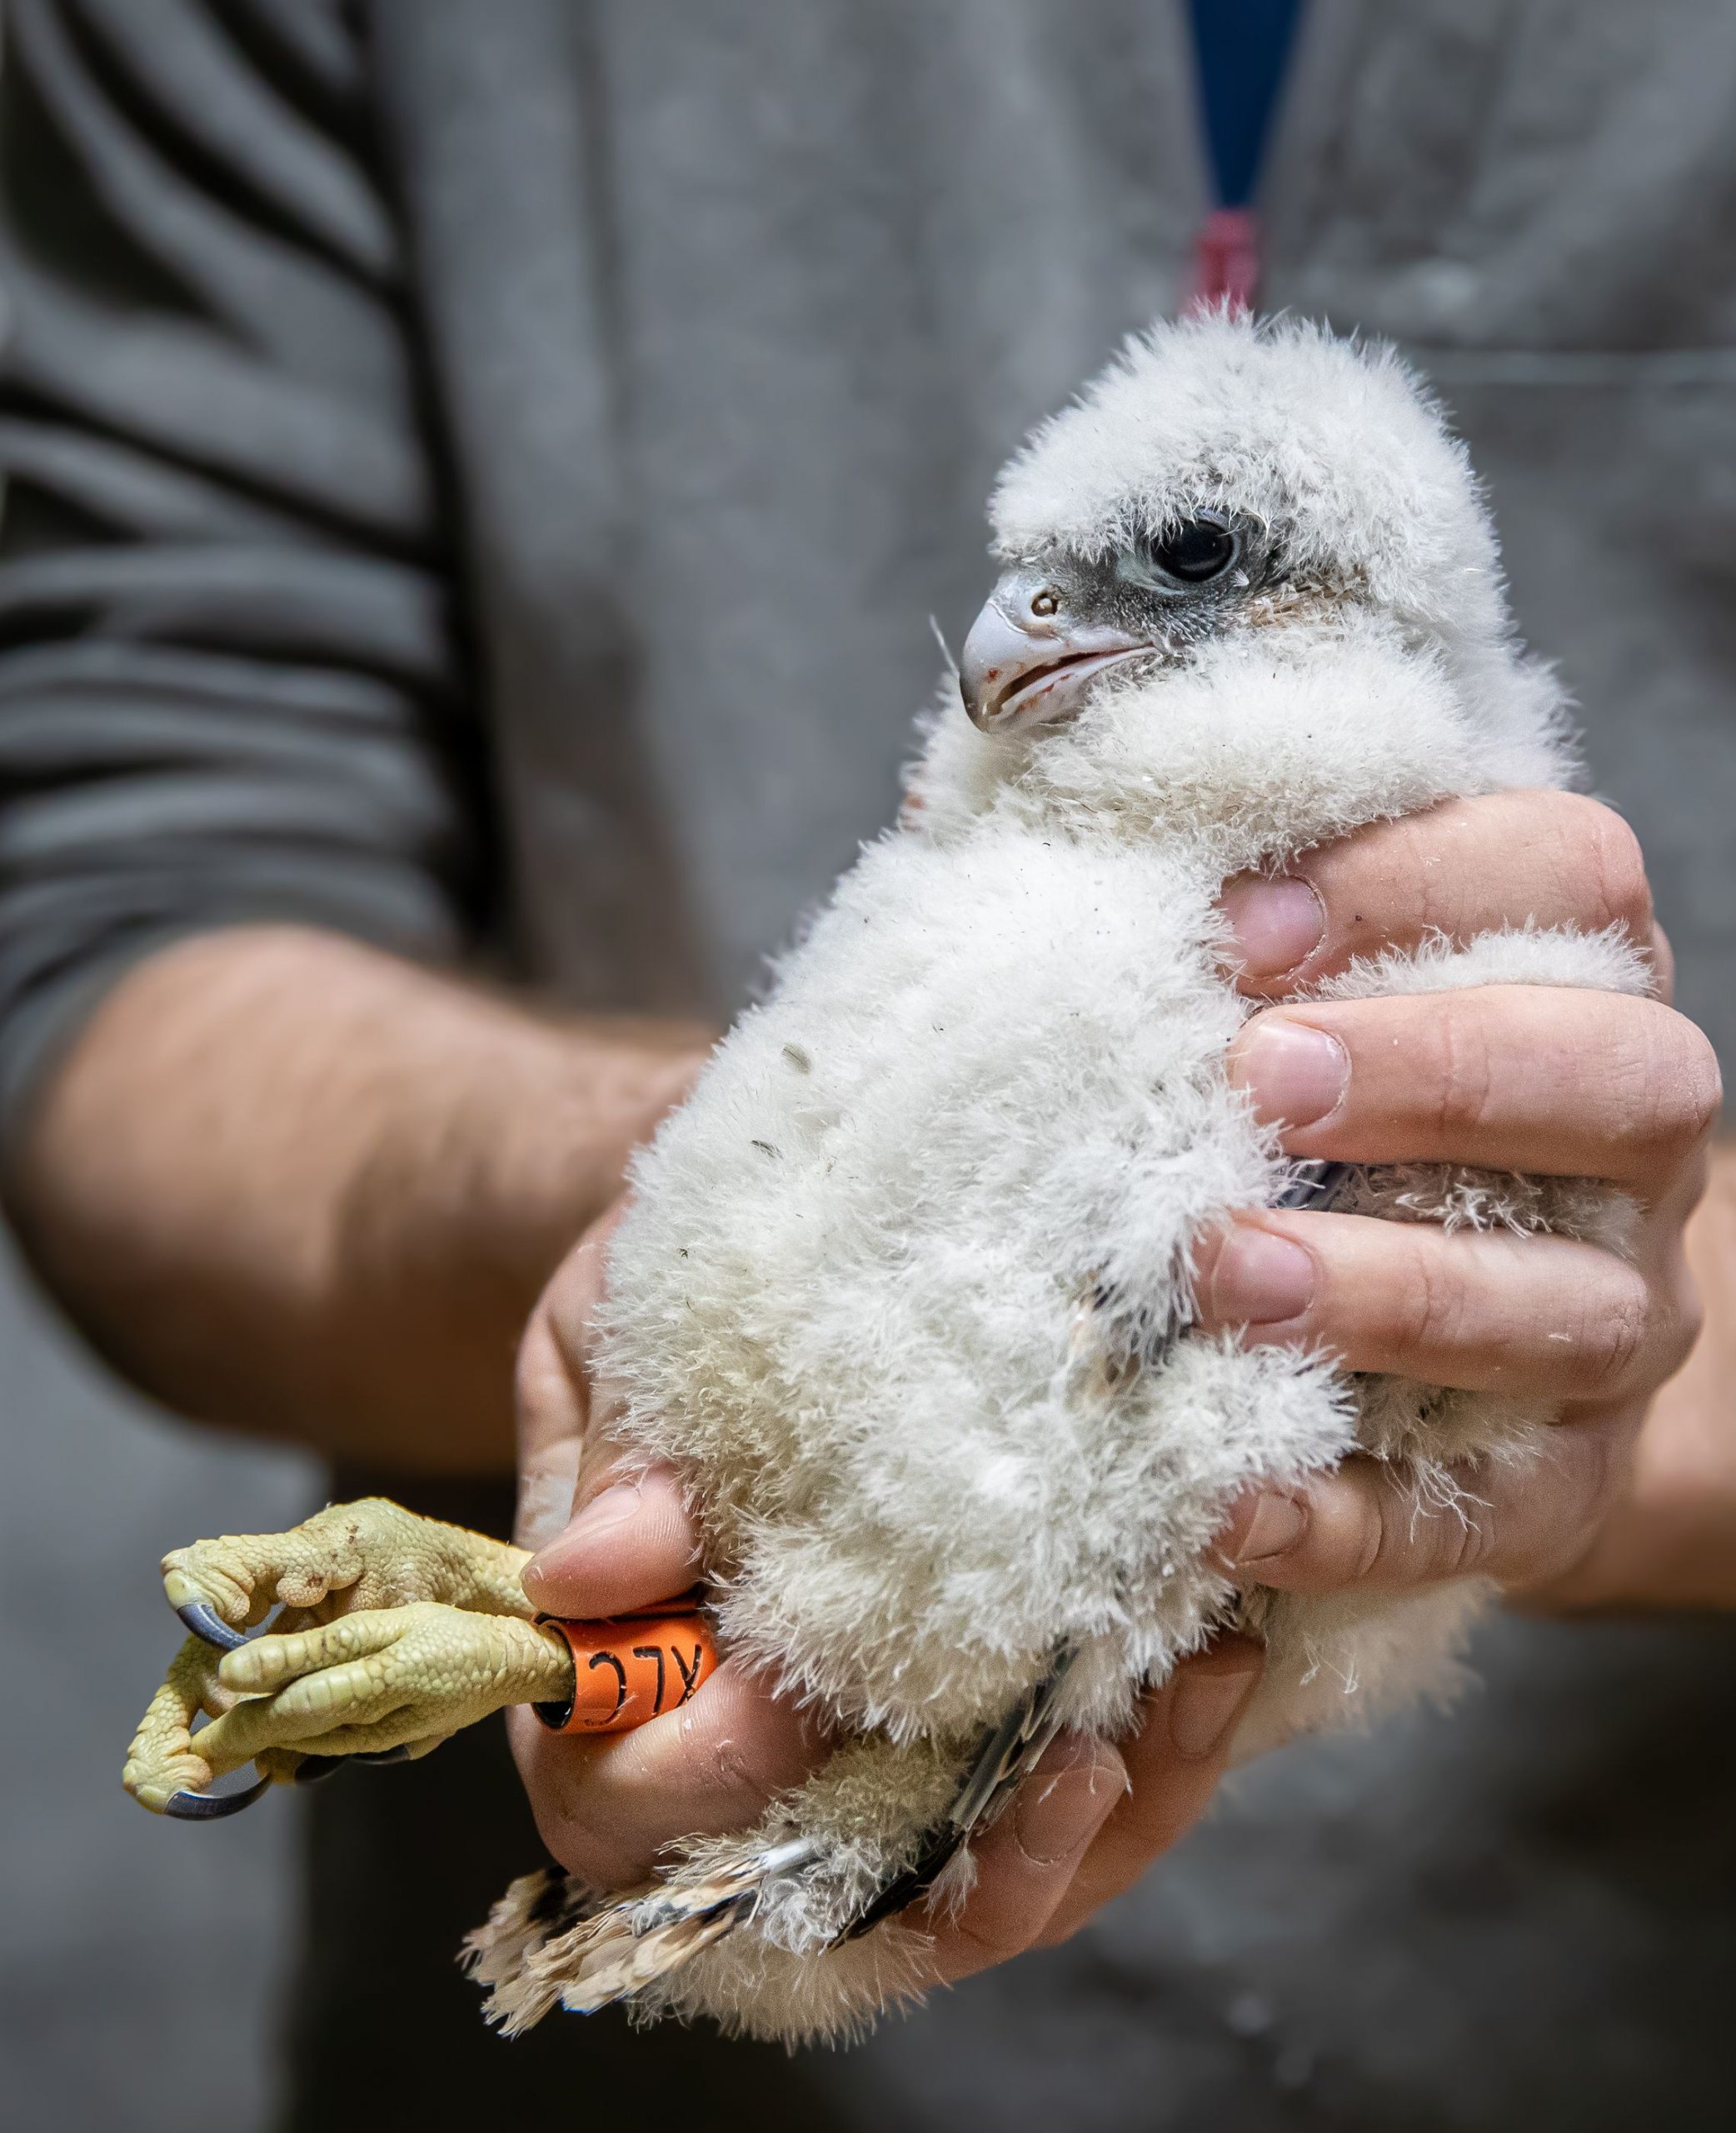 A peregrine falcon chick being held in someone's hands. The chick has a orange ring around its leg